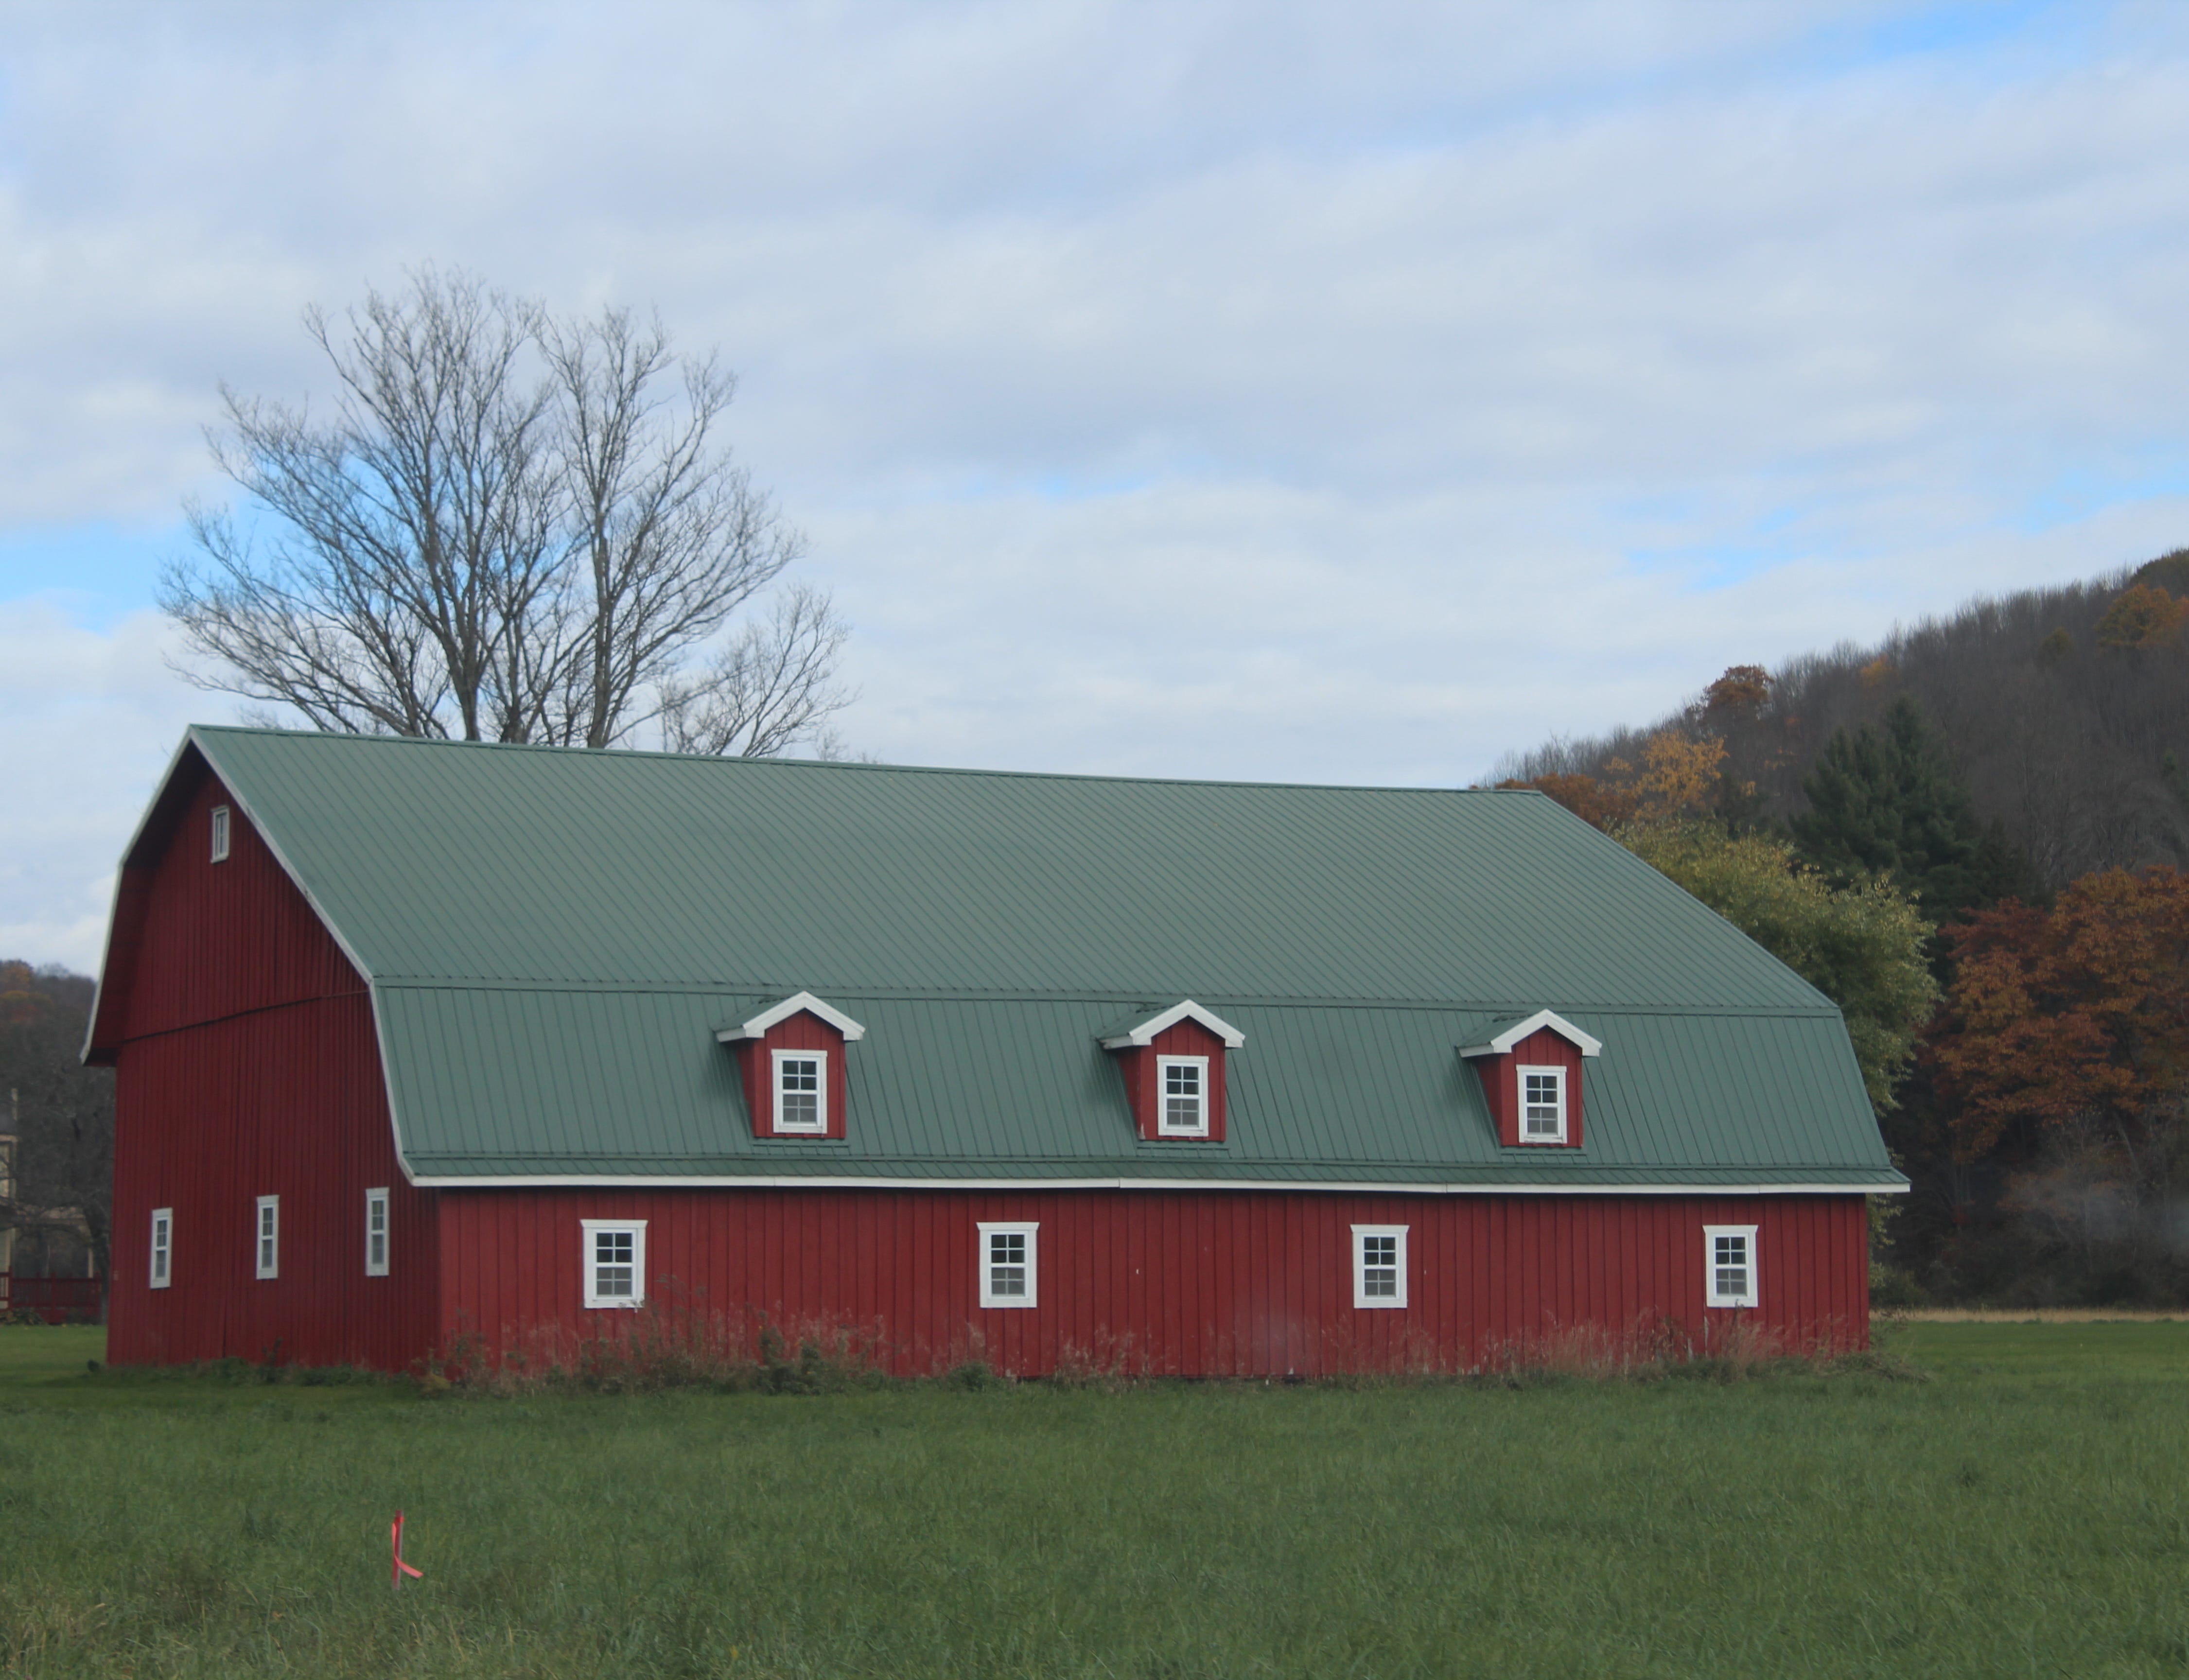 new-york-state-tax-credit-aims-spur-rehab-transformation-of-old-barns